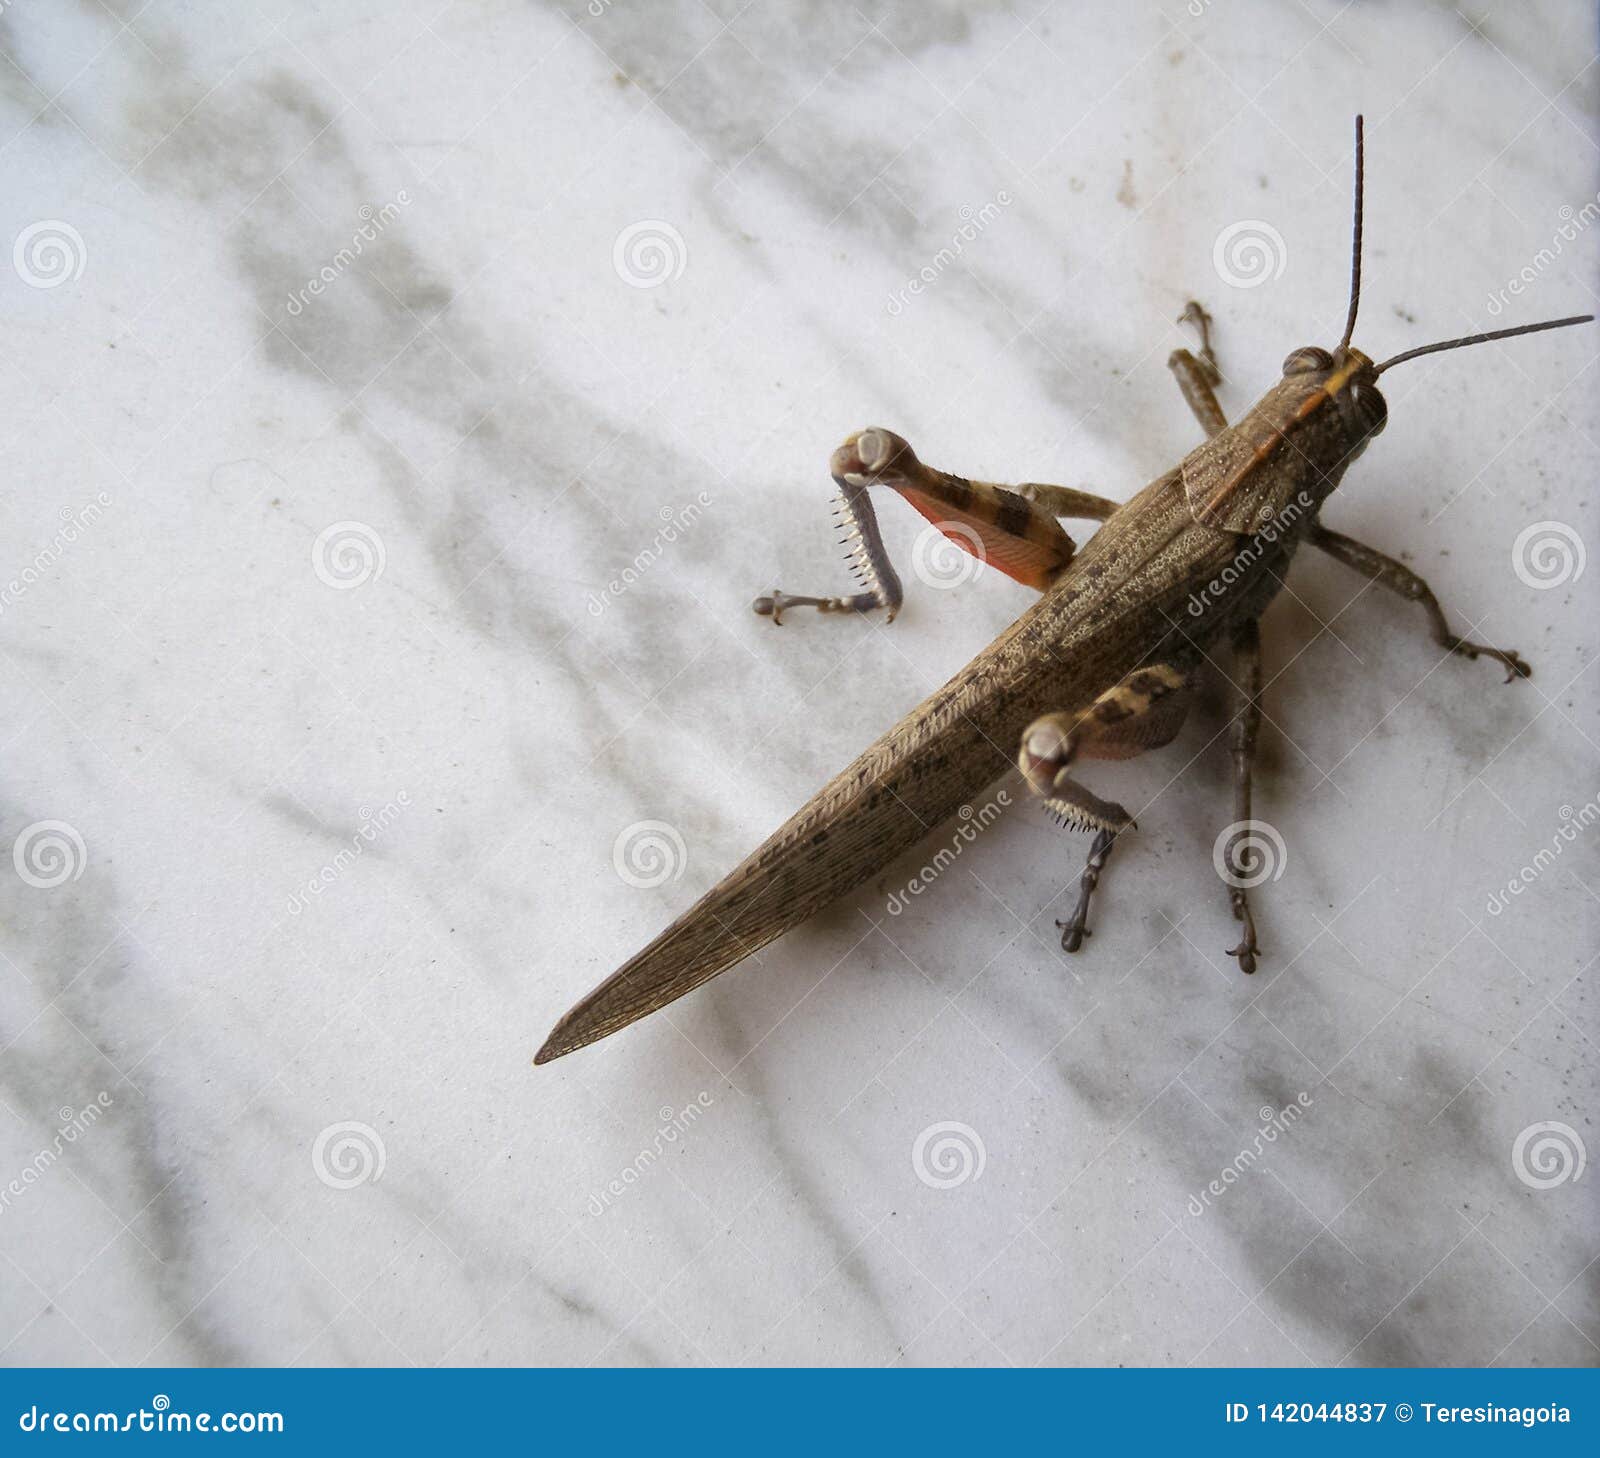 grasshopper animal of class insecta insects